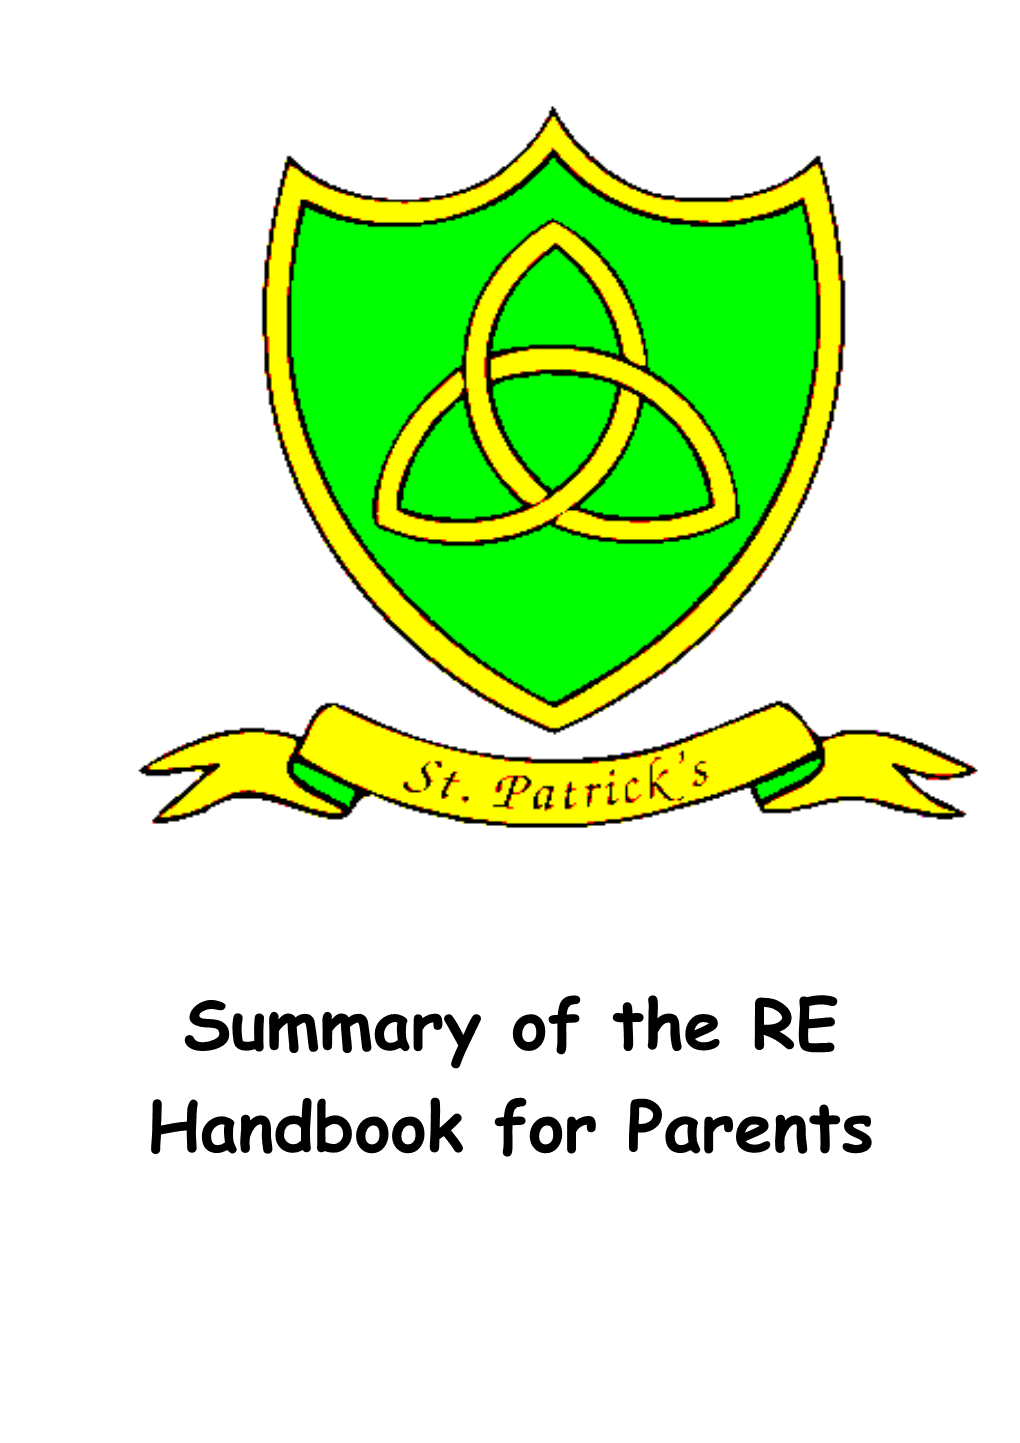 Summary of the RE Handbook for Parents